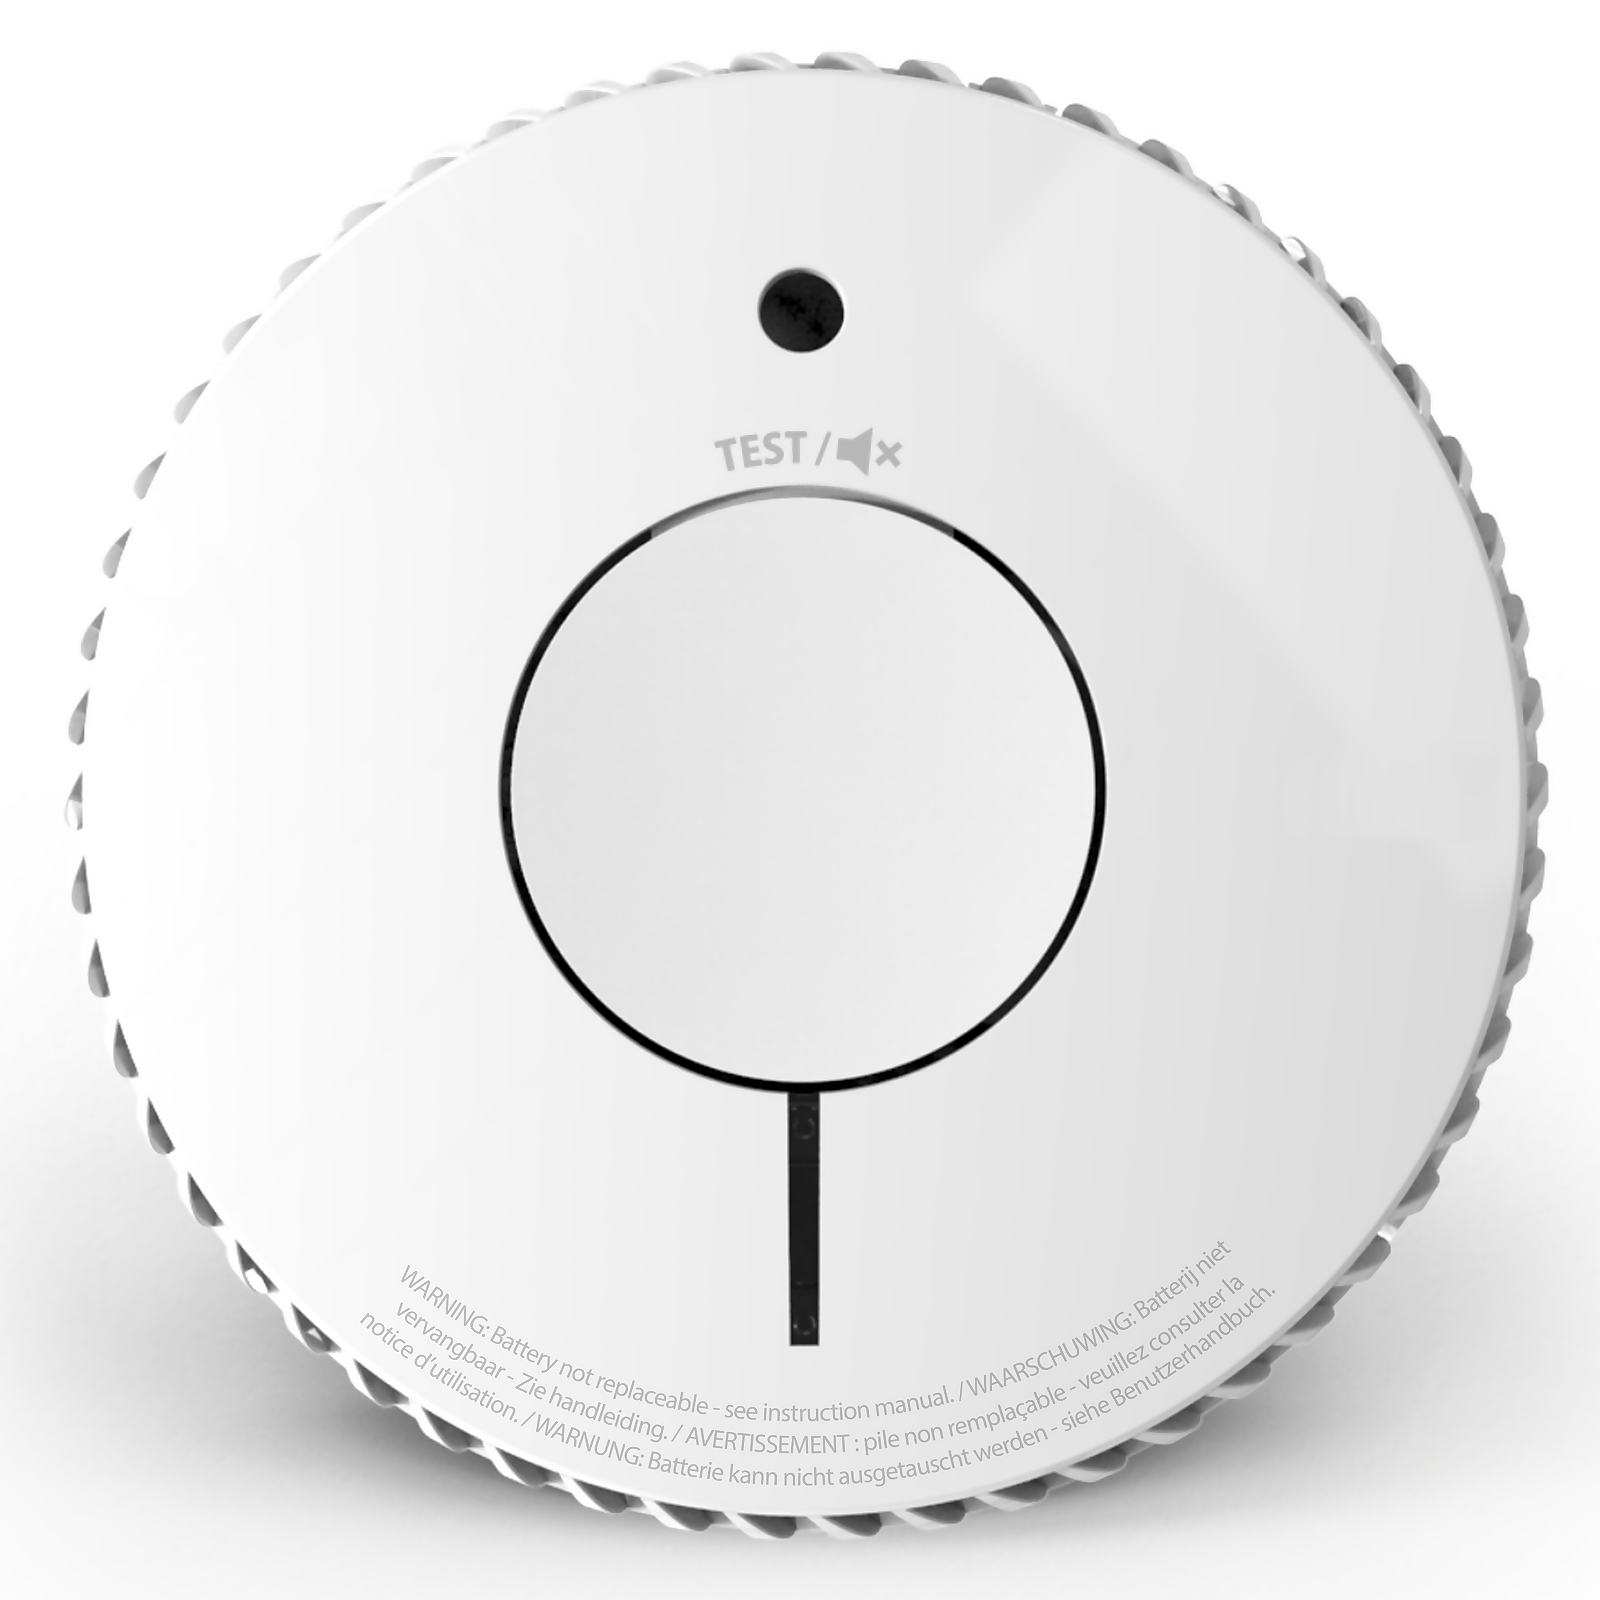 FireAngel Optical Smoke Alarm with 10 Year Sealed For Life Battery